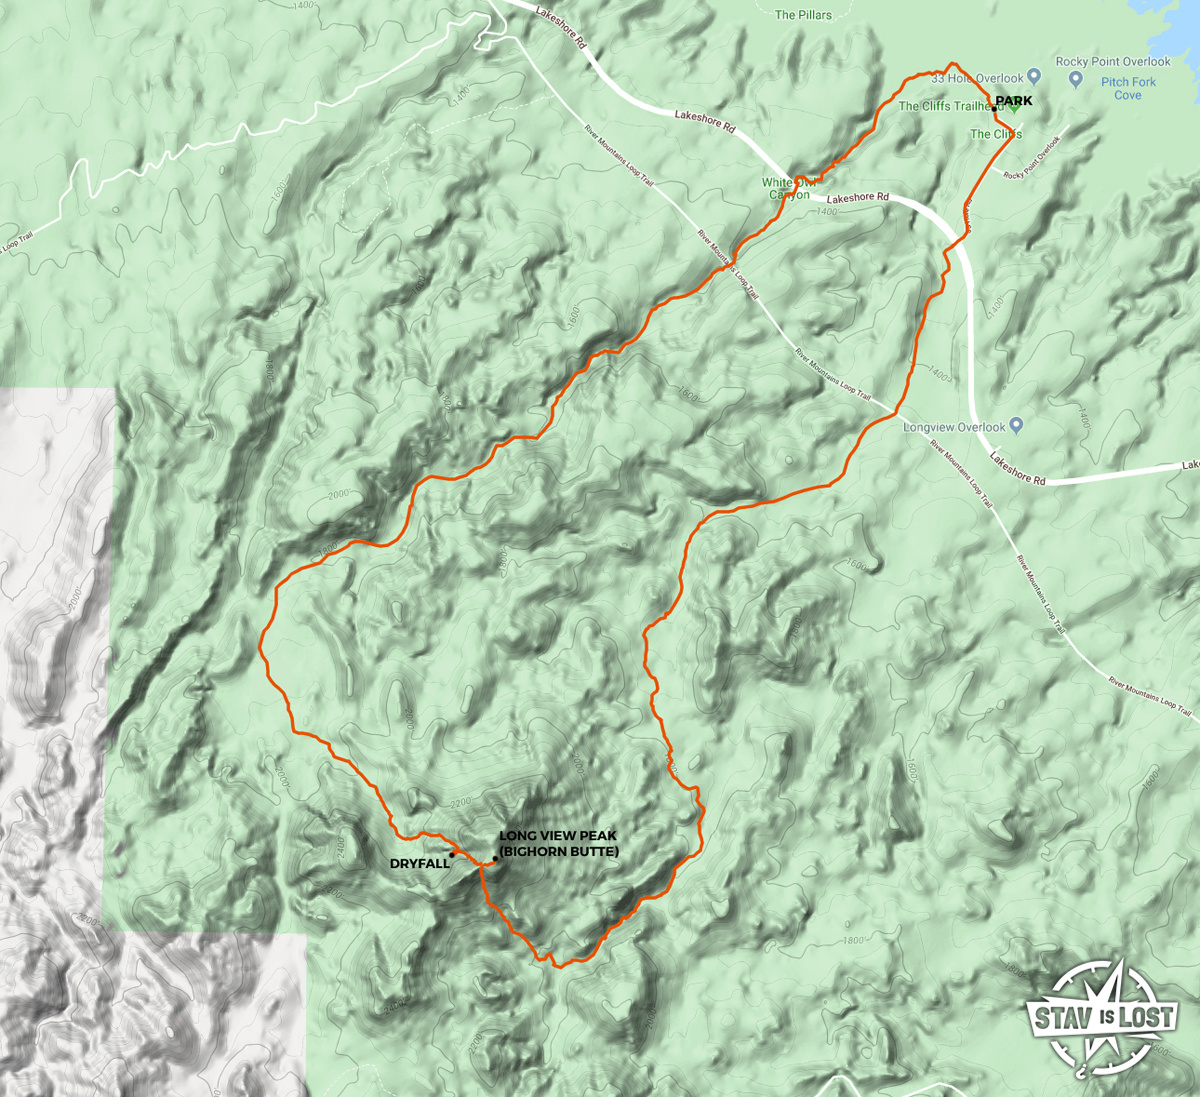 map for Long View Peak and White Owl Canyon Loop by stav is lost